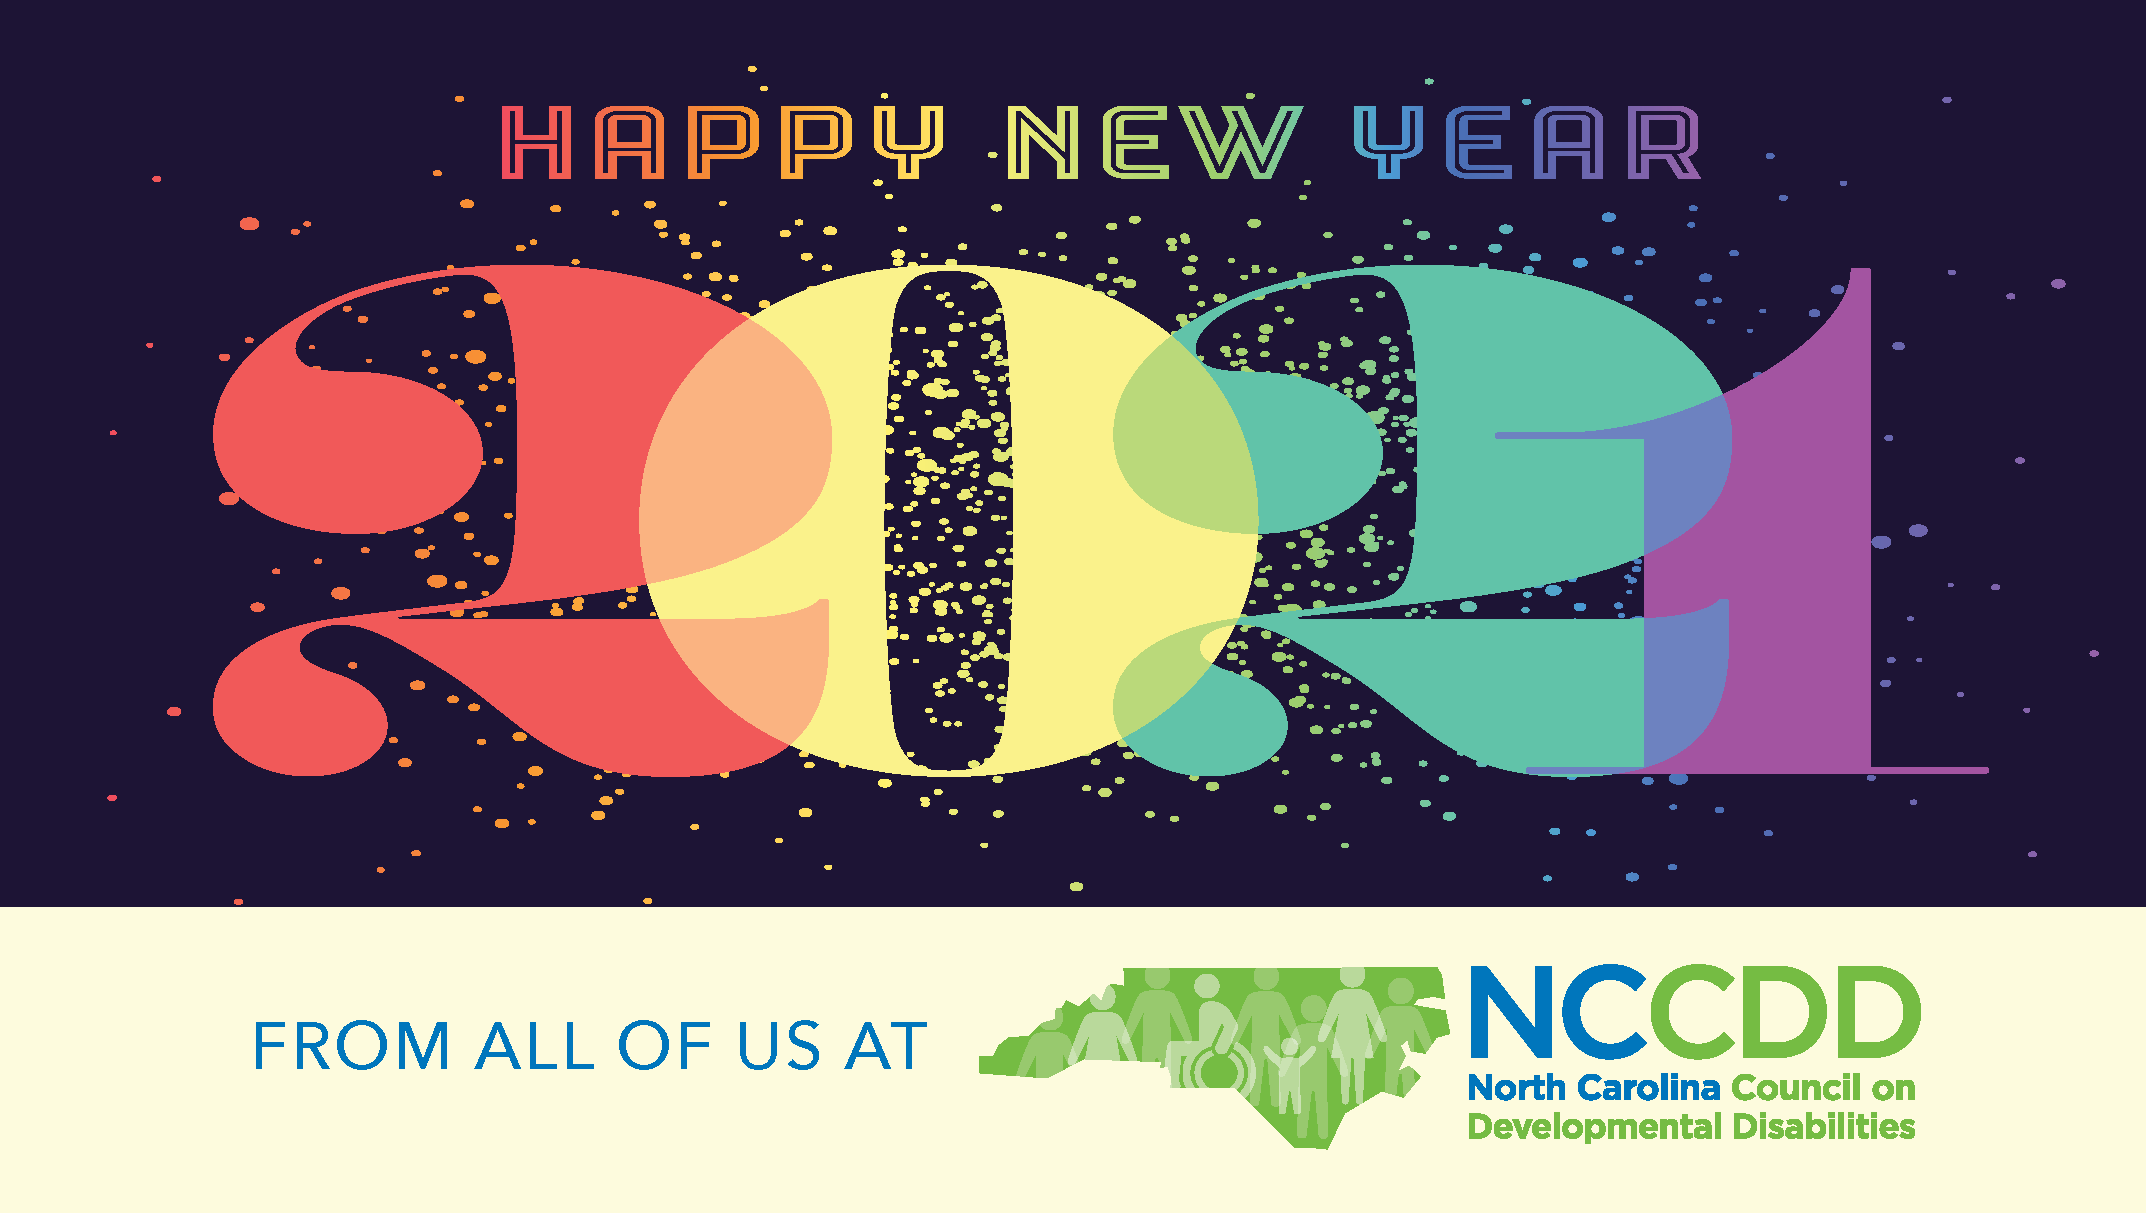 Happy New Year from all of us at NCCDD